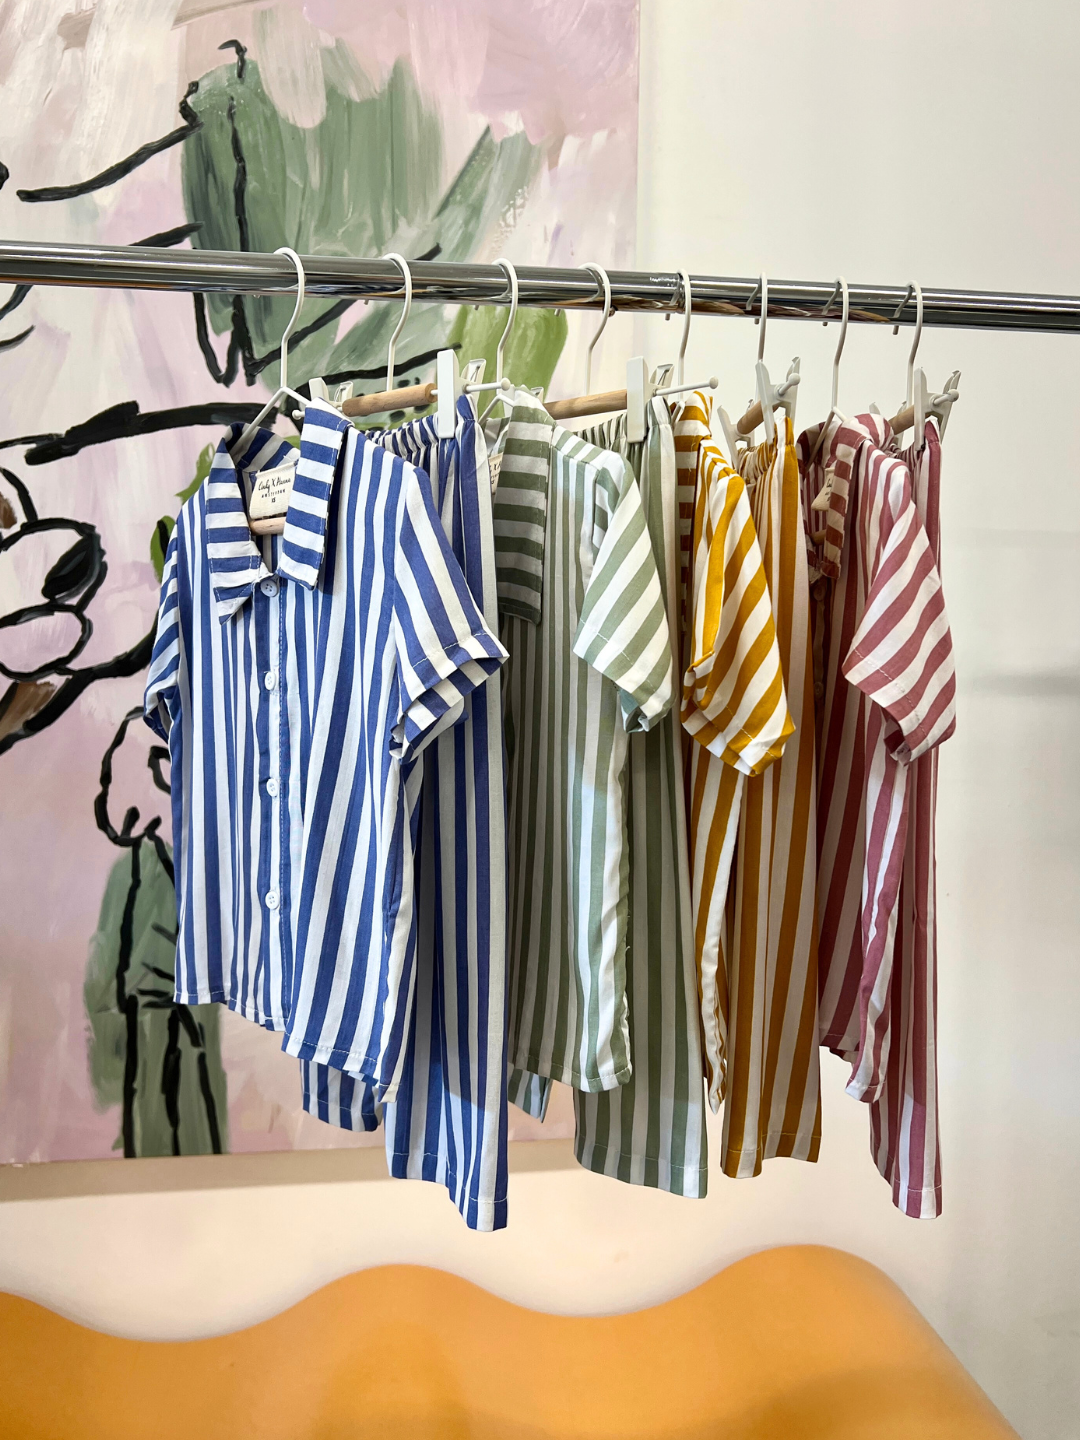 All colors of the kid's Michi Pajamas hanging on the rack